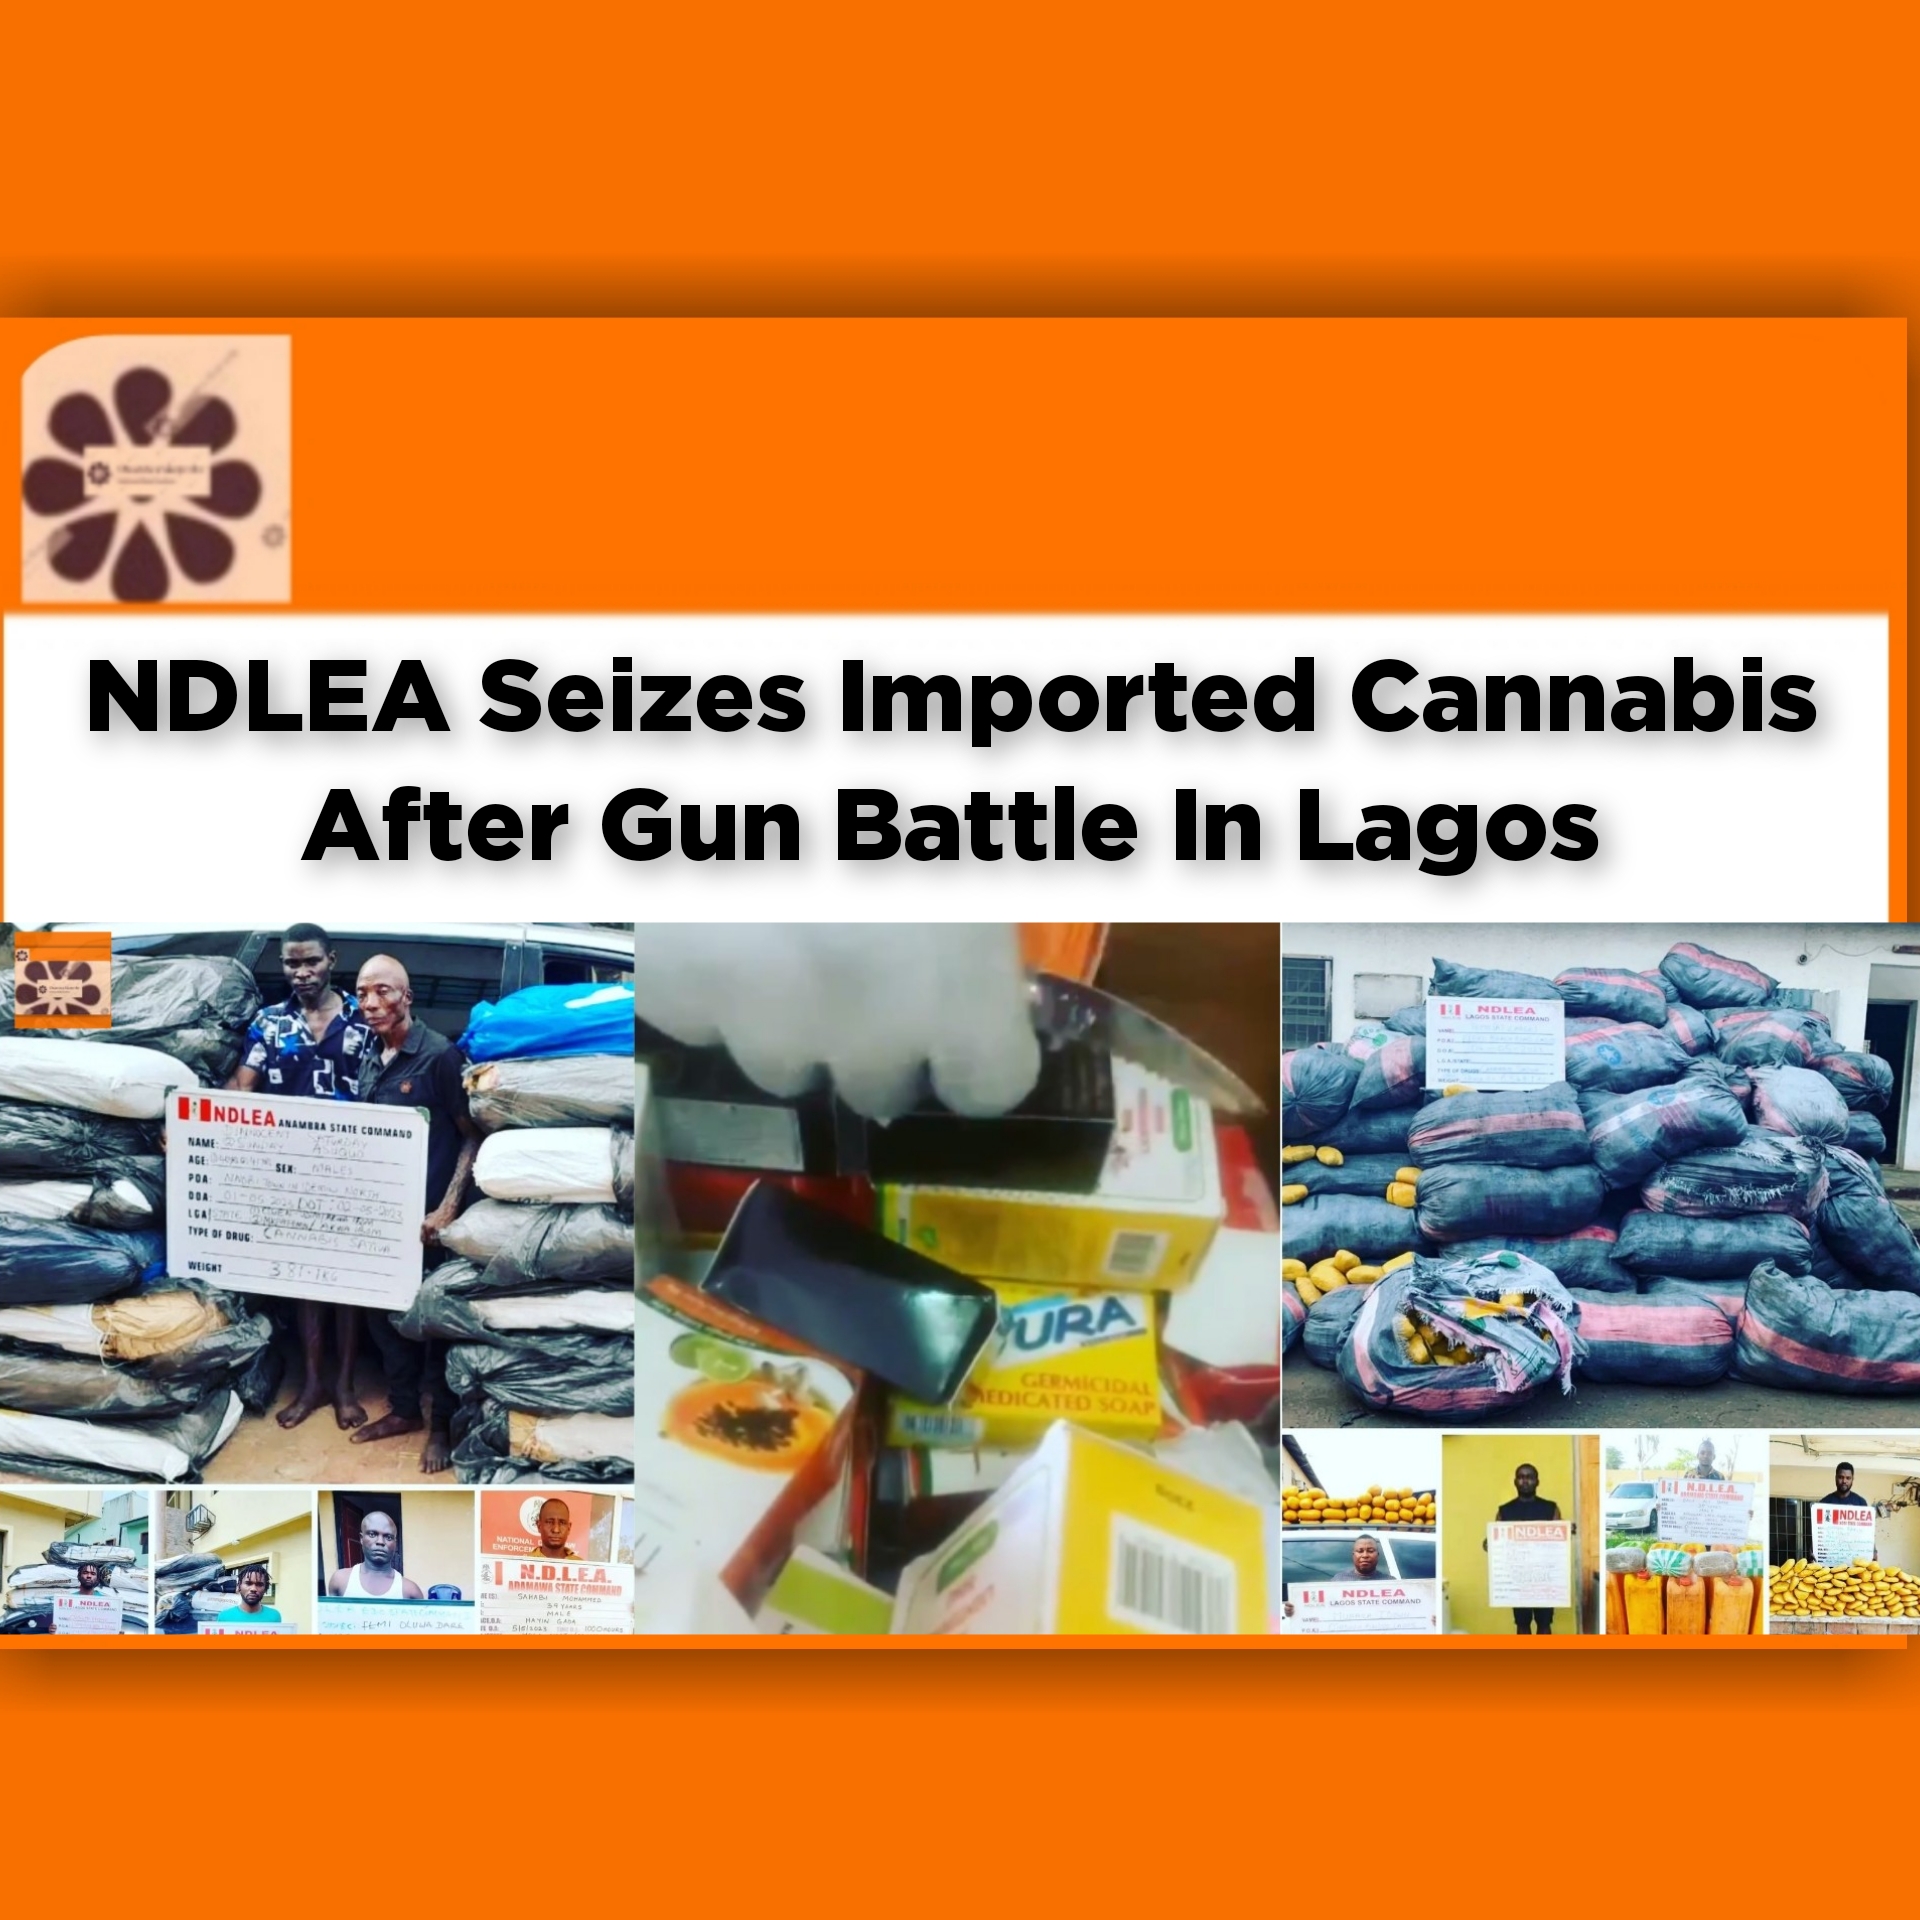 NDLEA Seizes Imported Cannabis After Gun Battle In Lagos